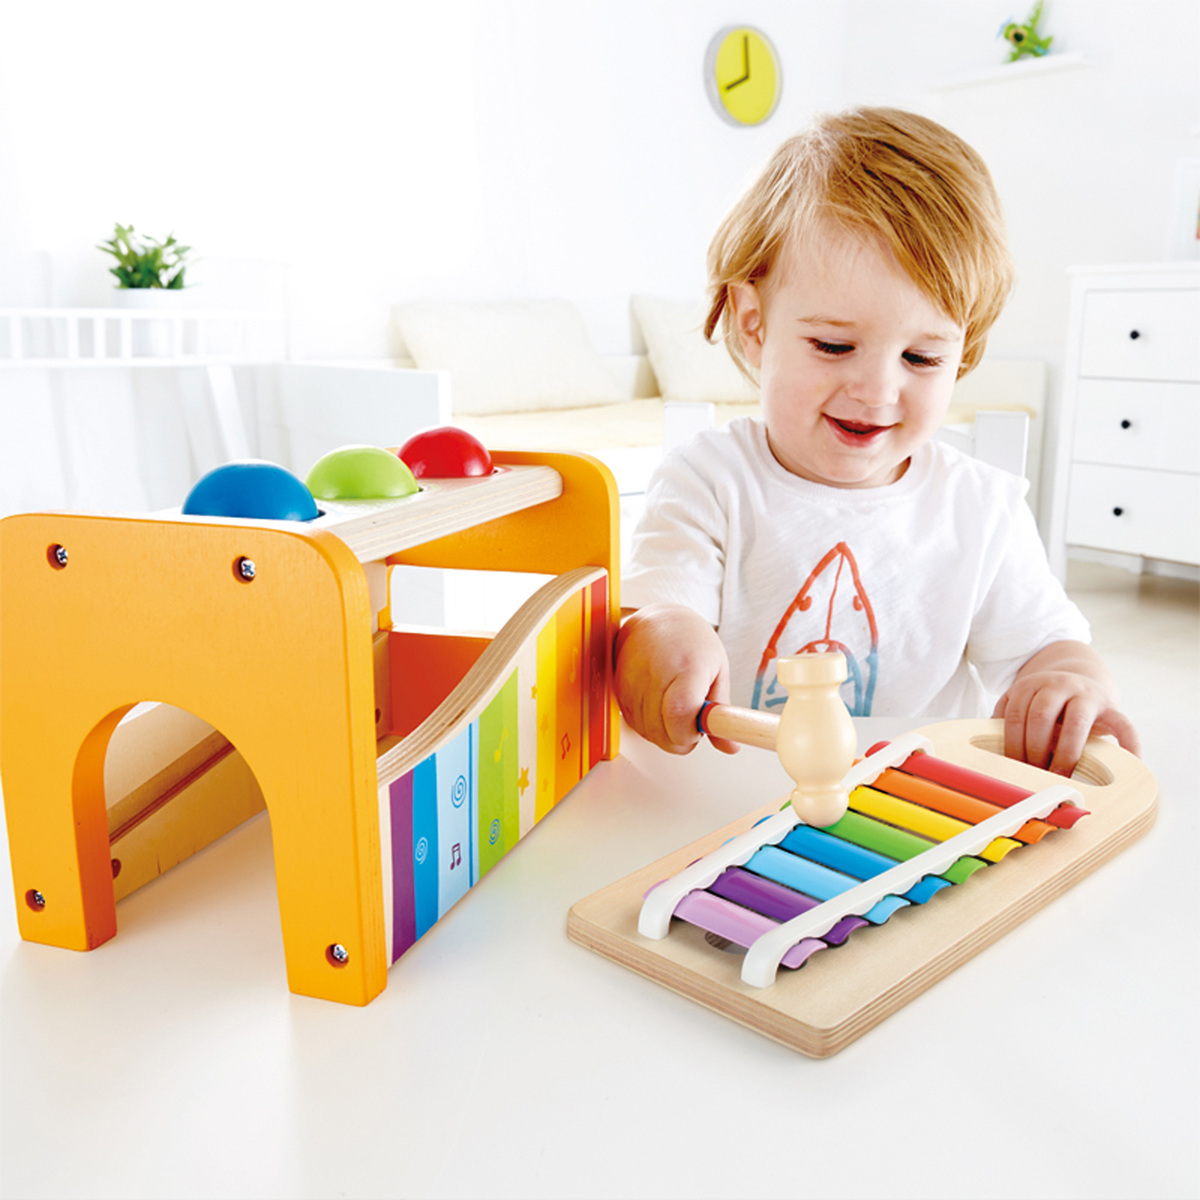 Hape Pound and Tap Bench Set for Kids, E0305